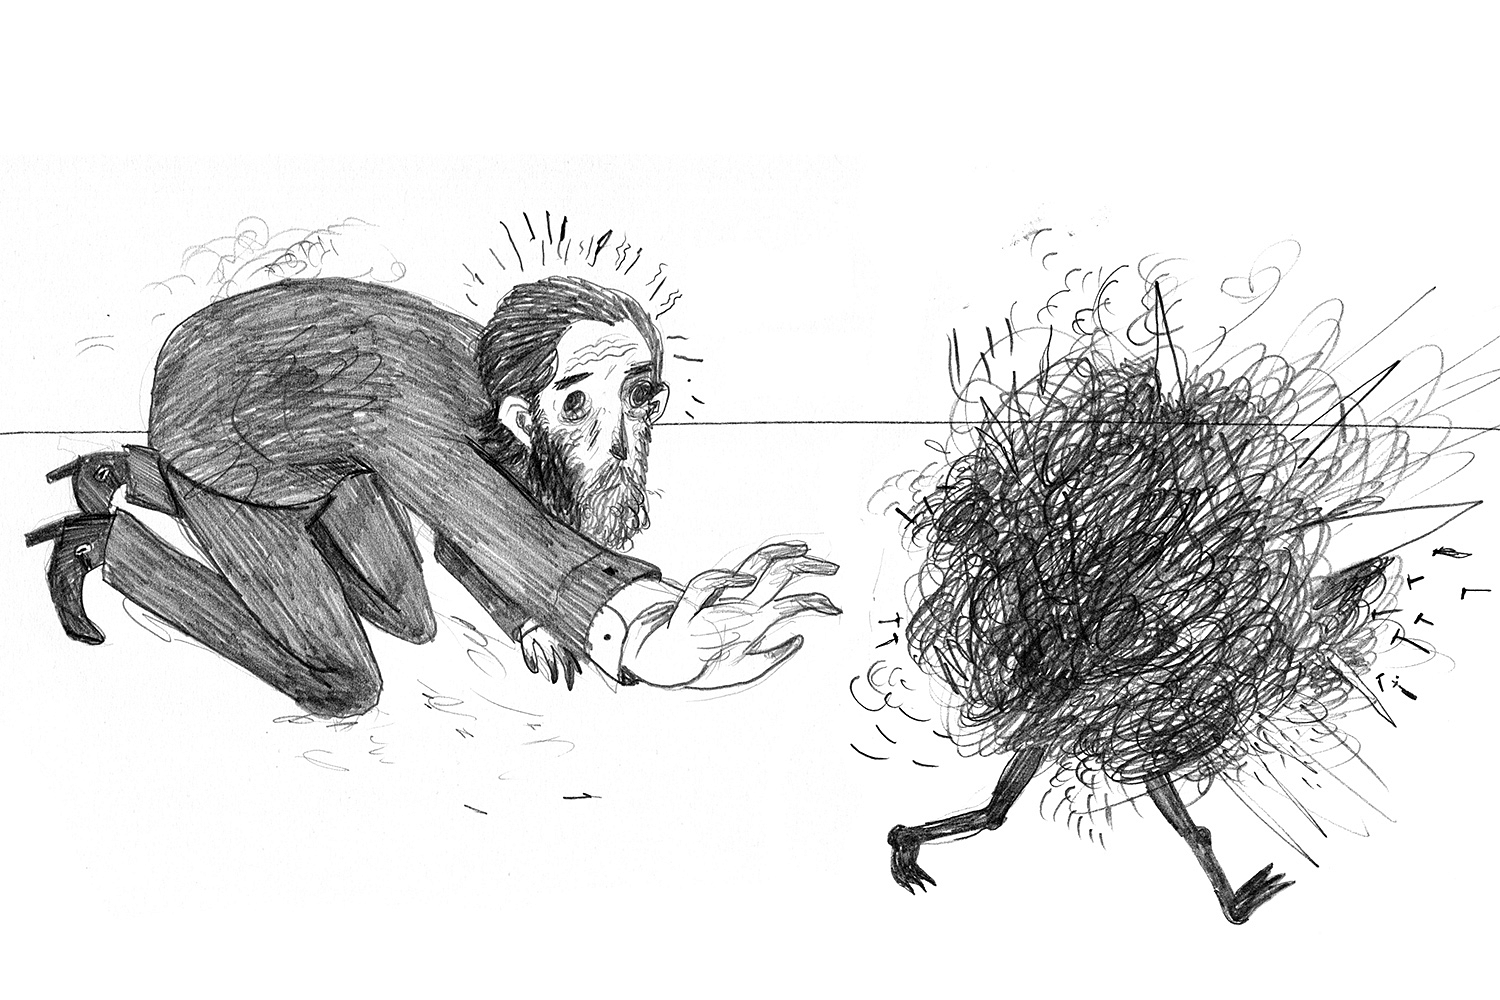 Keaton Henson offers up an illustrated guide to new album 'Kindly Now'